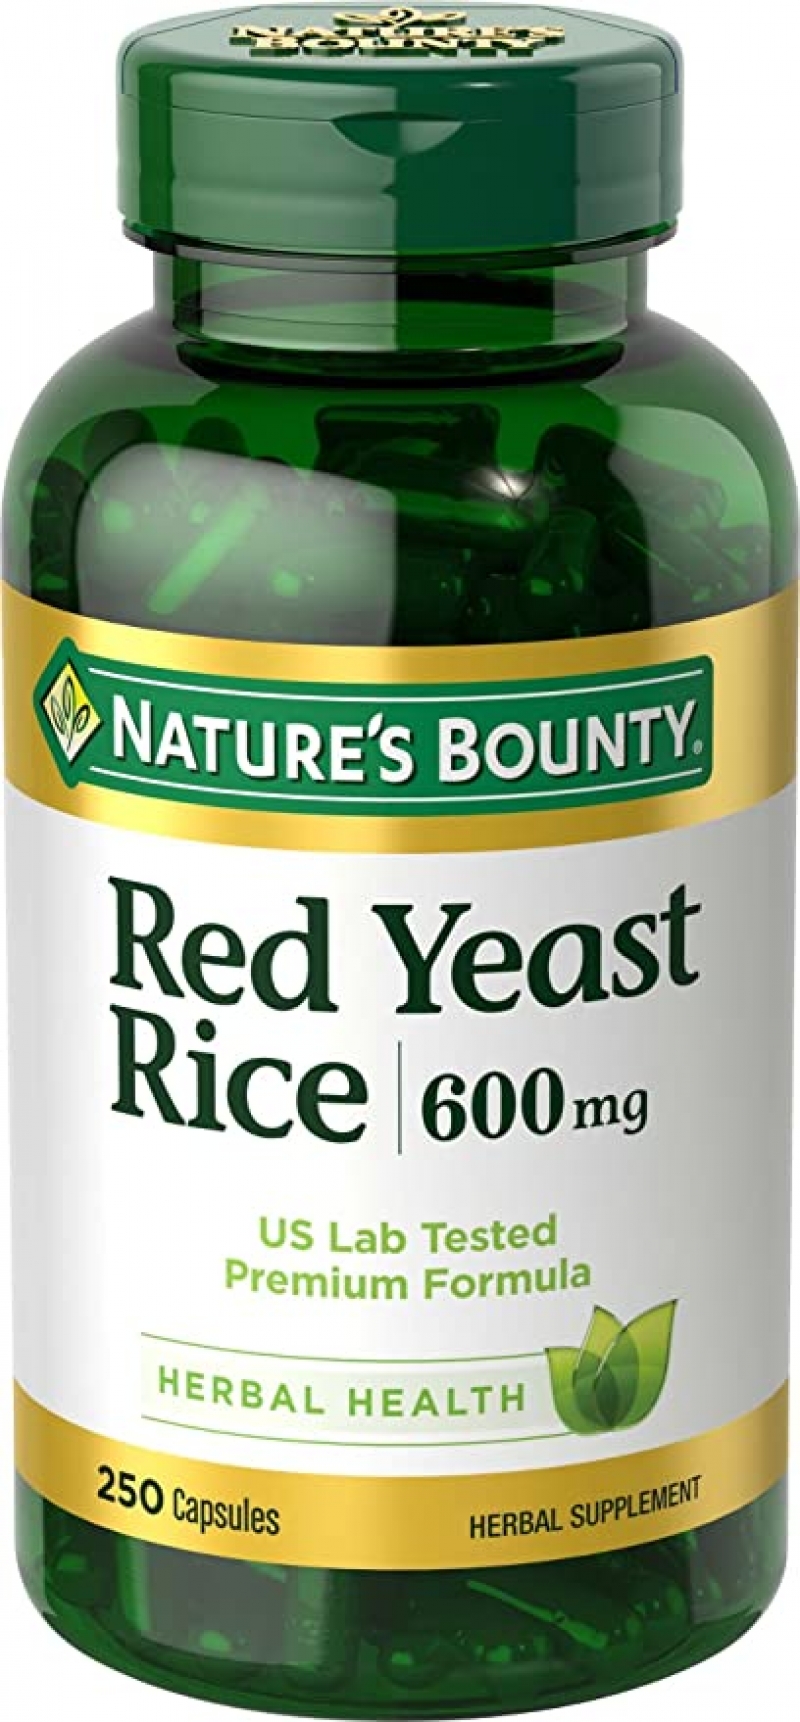 ihocon: Nature's Bounty Red Yeast Rice Pills & Herbal Health Supplement, Dietary Additive, 600mg Capsules, 250 Count '  红曲胶囊